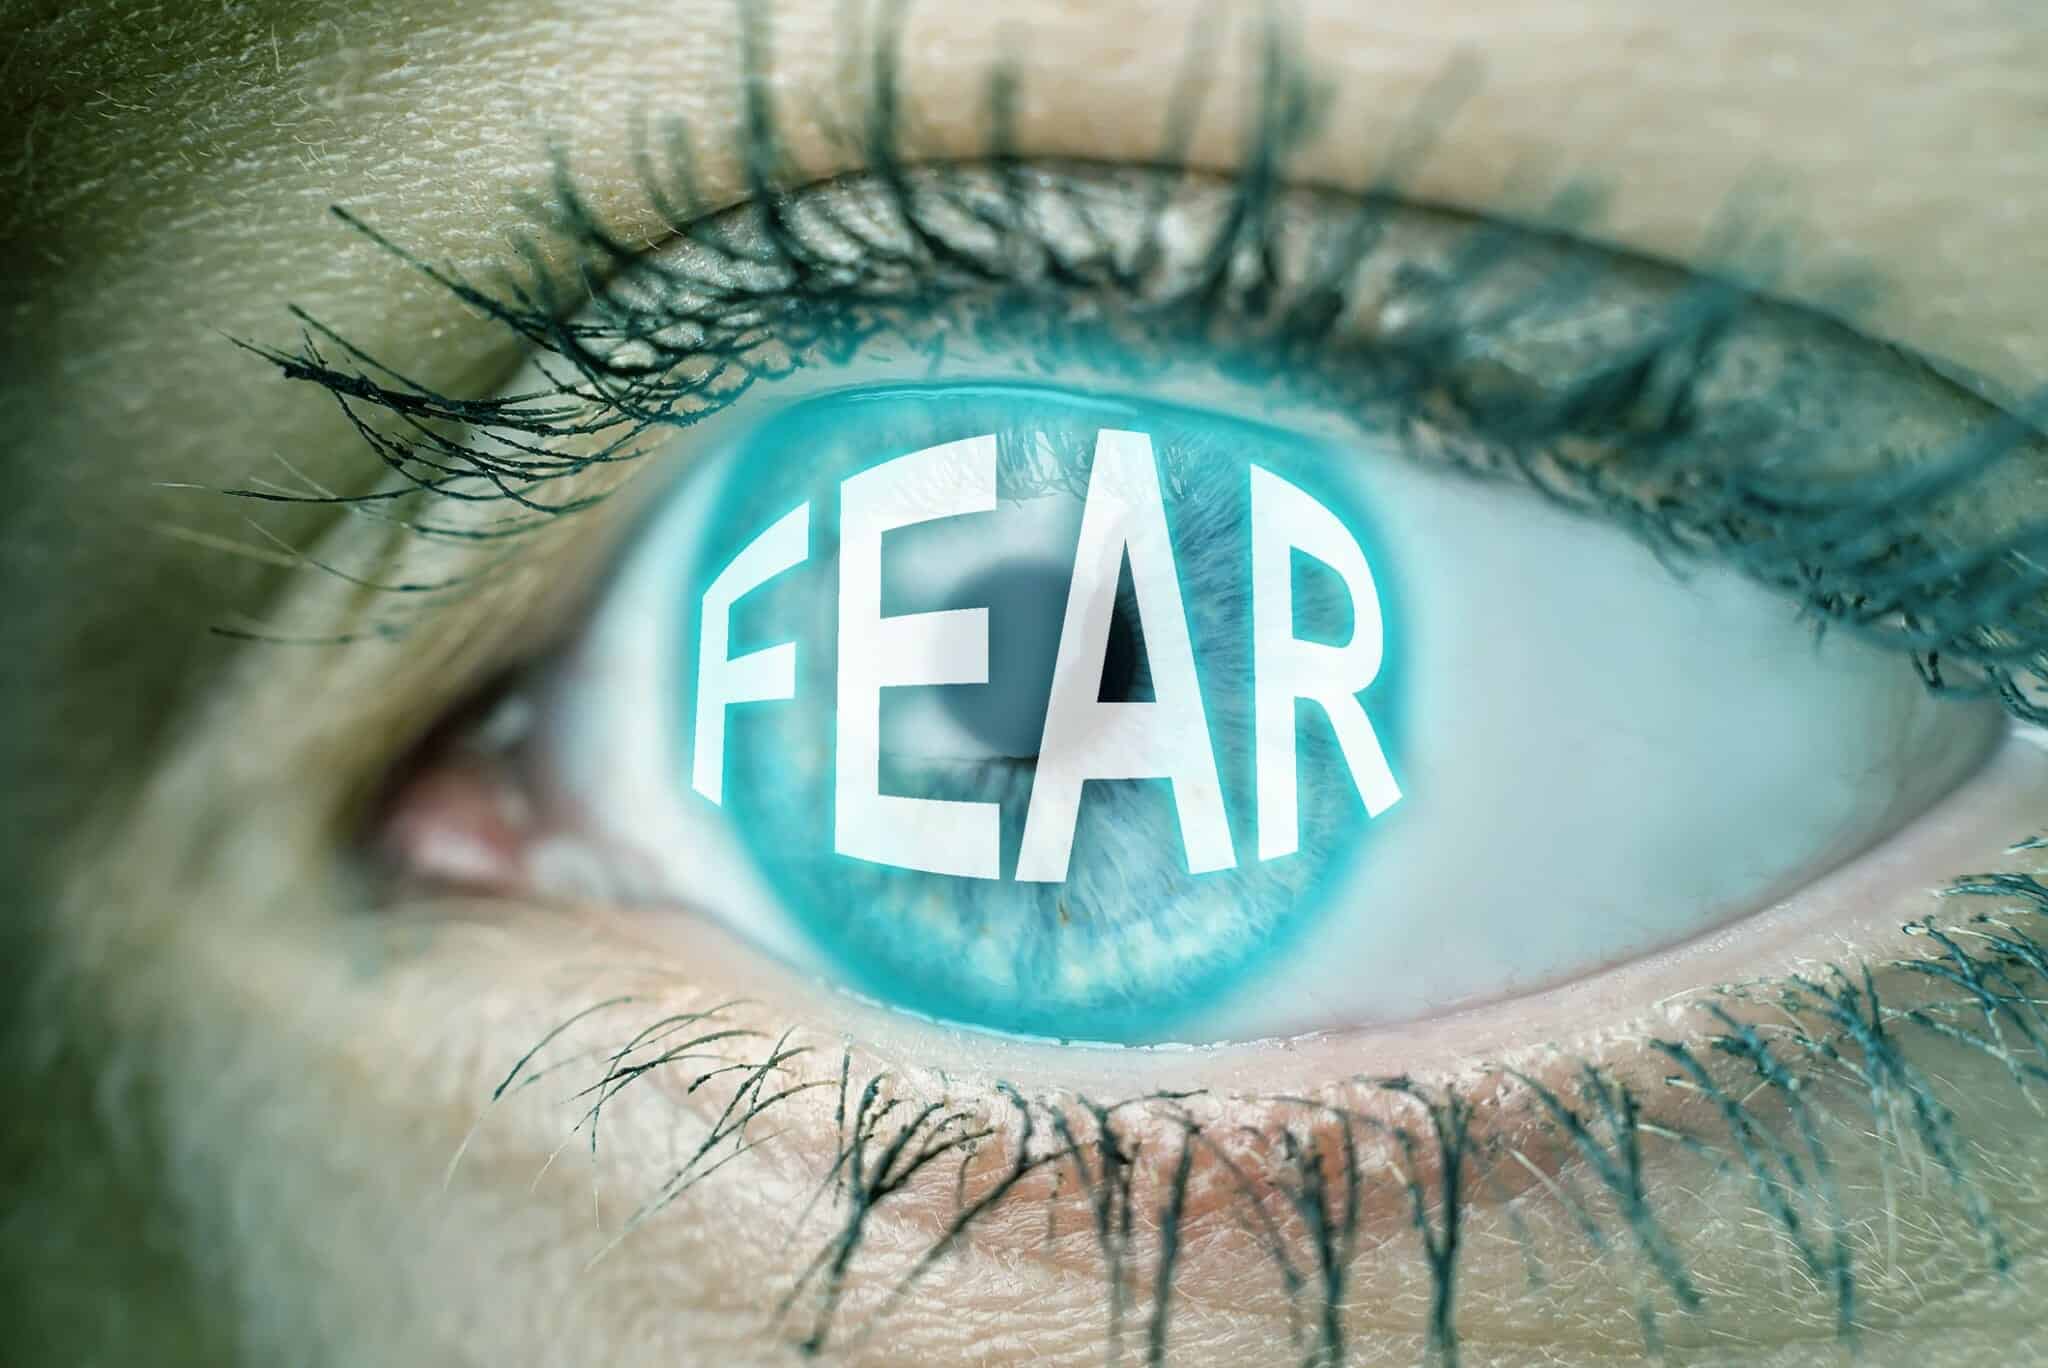 Close up of eyeball with the word "Fear" on it: Fear of Divorce